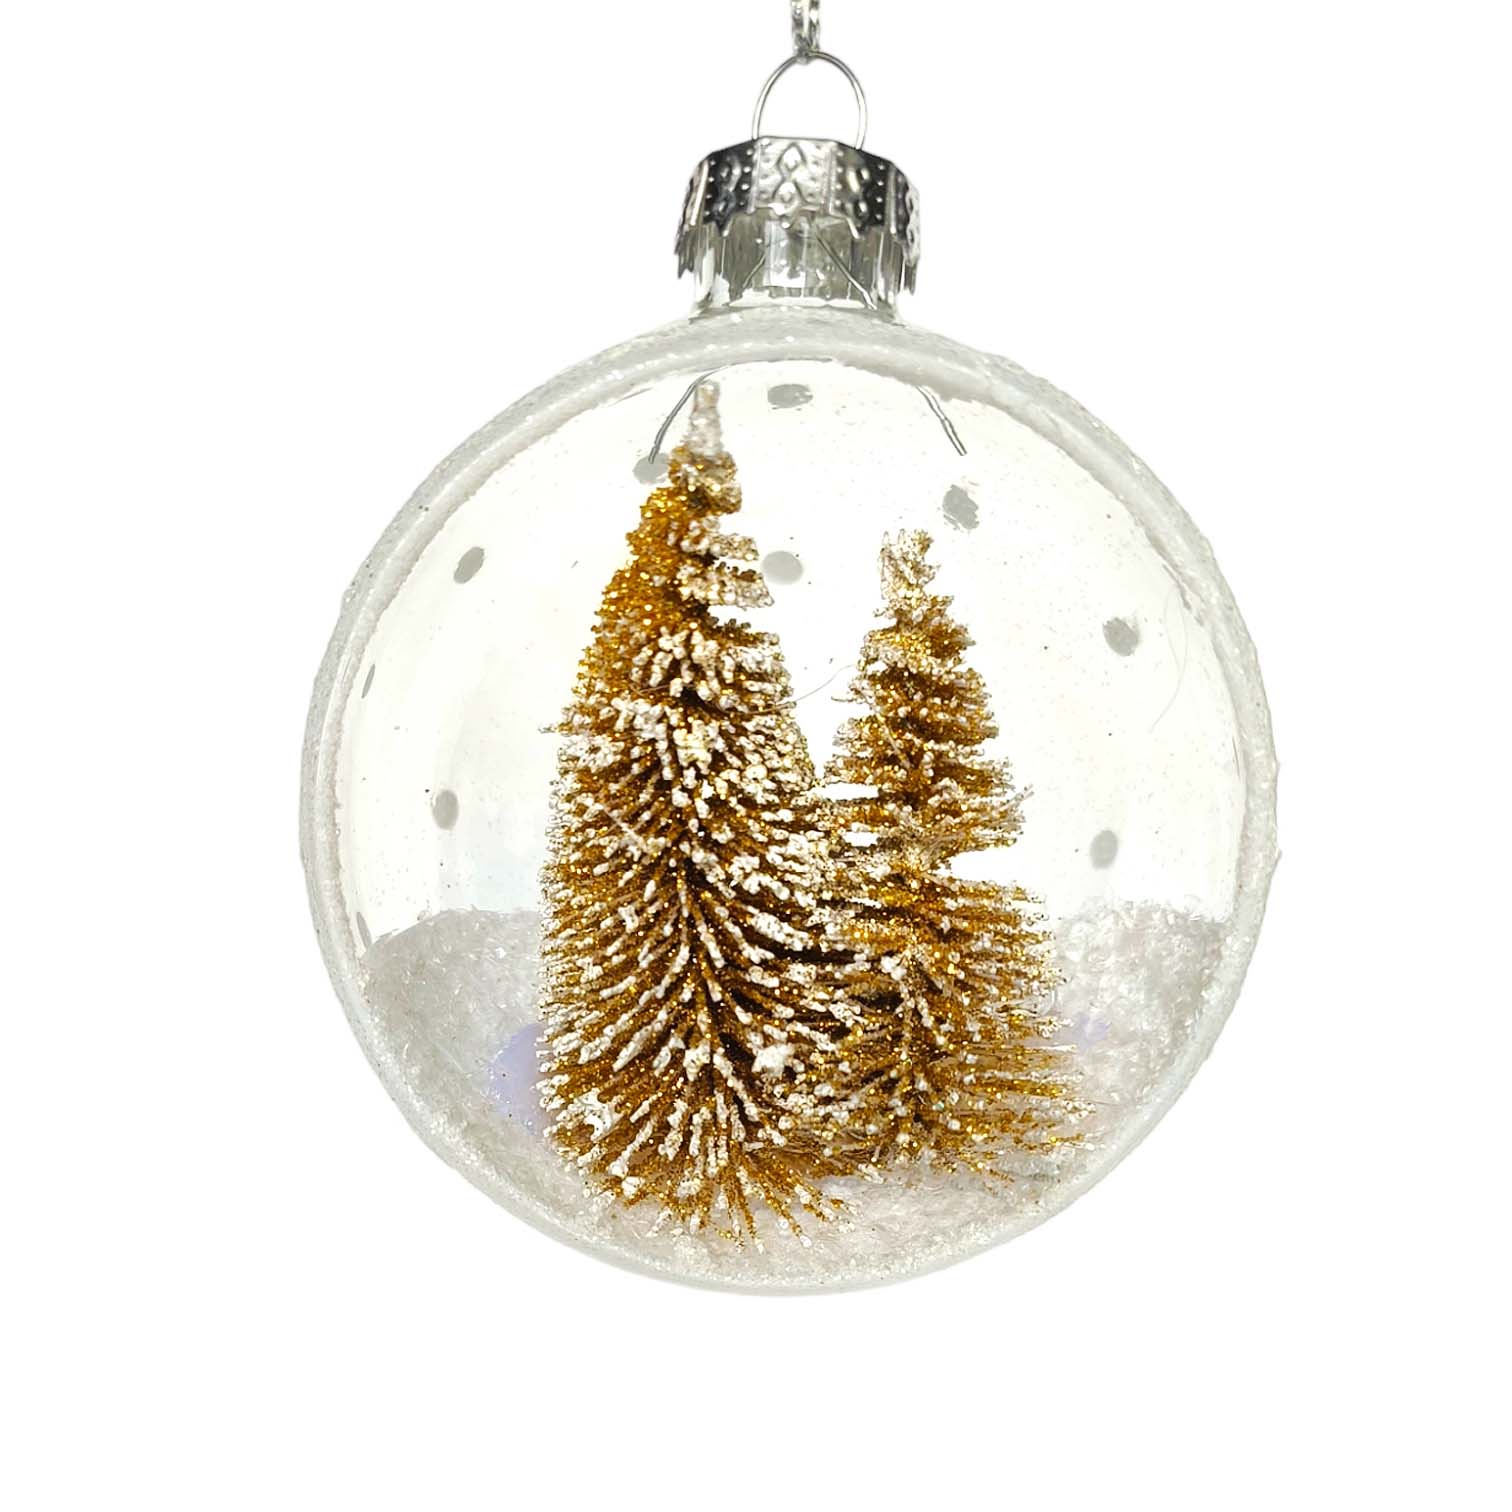 15 ideas for christmas decor gold to add sparkle to your holiday season